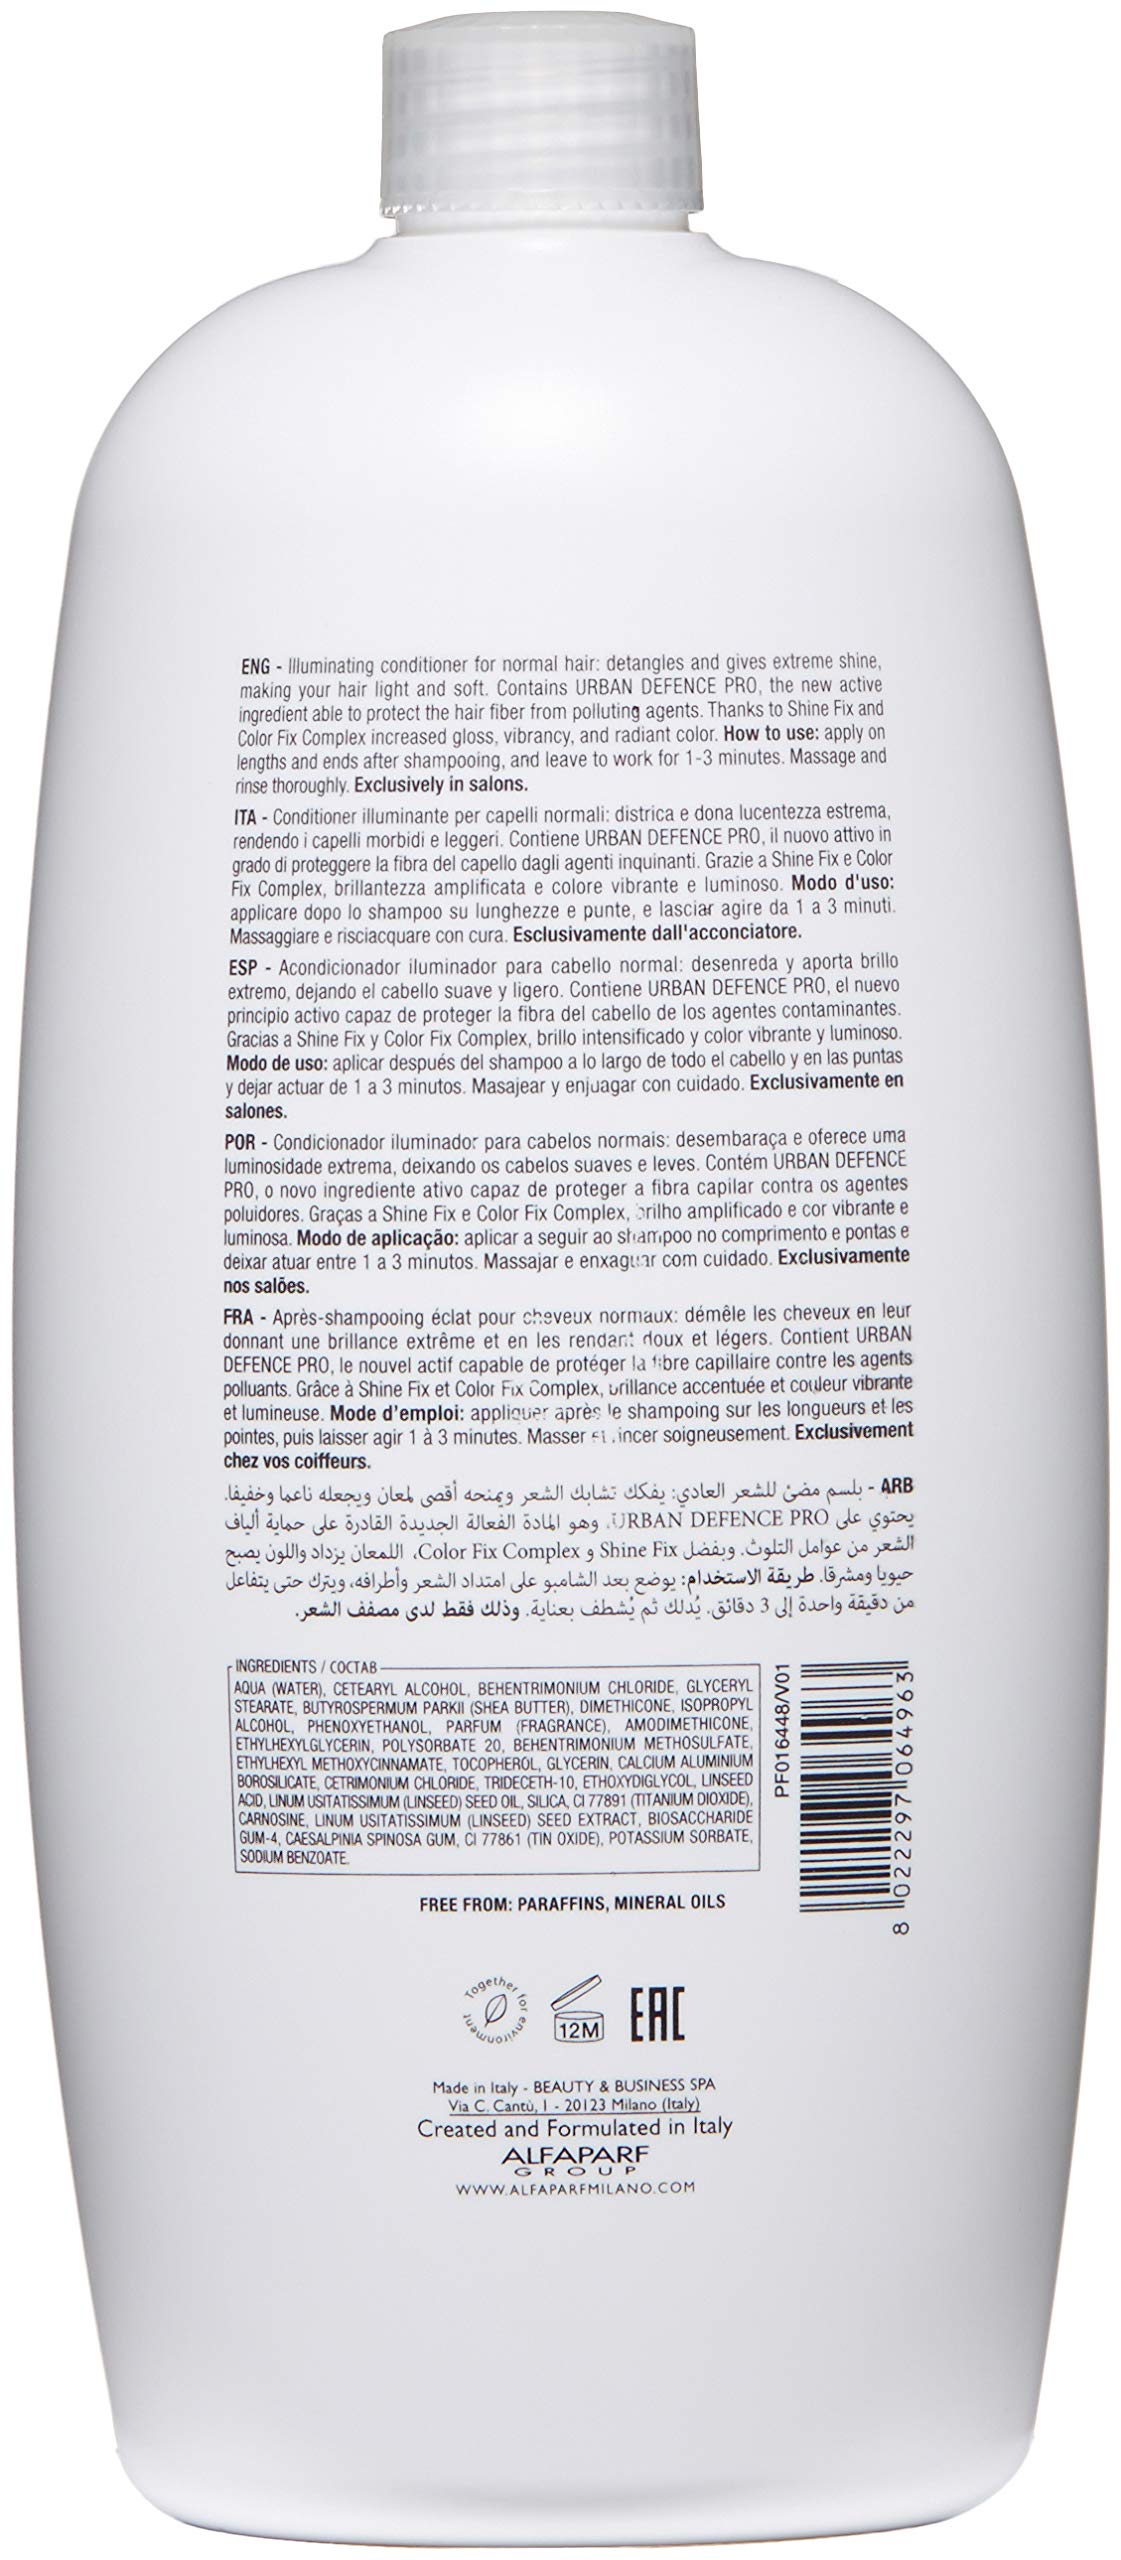 Alfaparf Milano Semi Di Lino Diamond Shine Illuminating Hair Conditioner - Sulfate Free - For Normal Hair - Safe on Color Treated Hair - Paraben and Paraffin Free - Professional Salon Quality